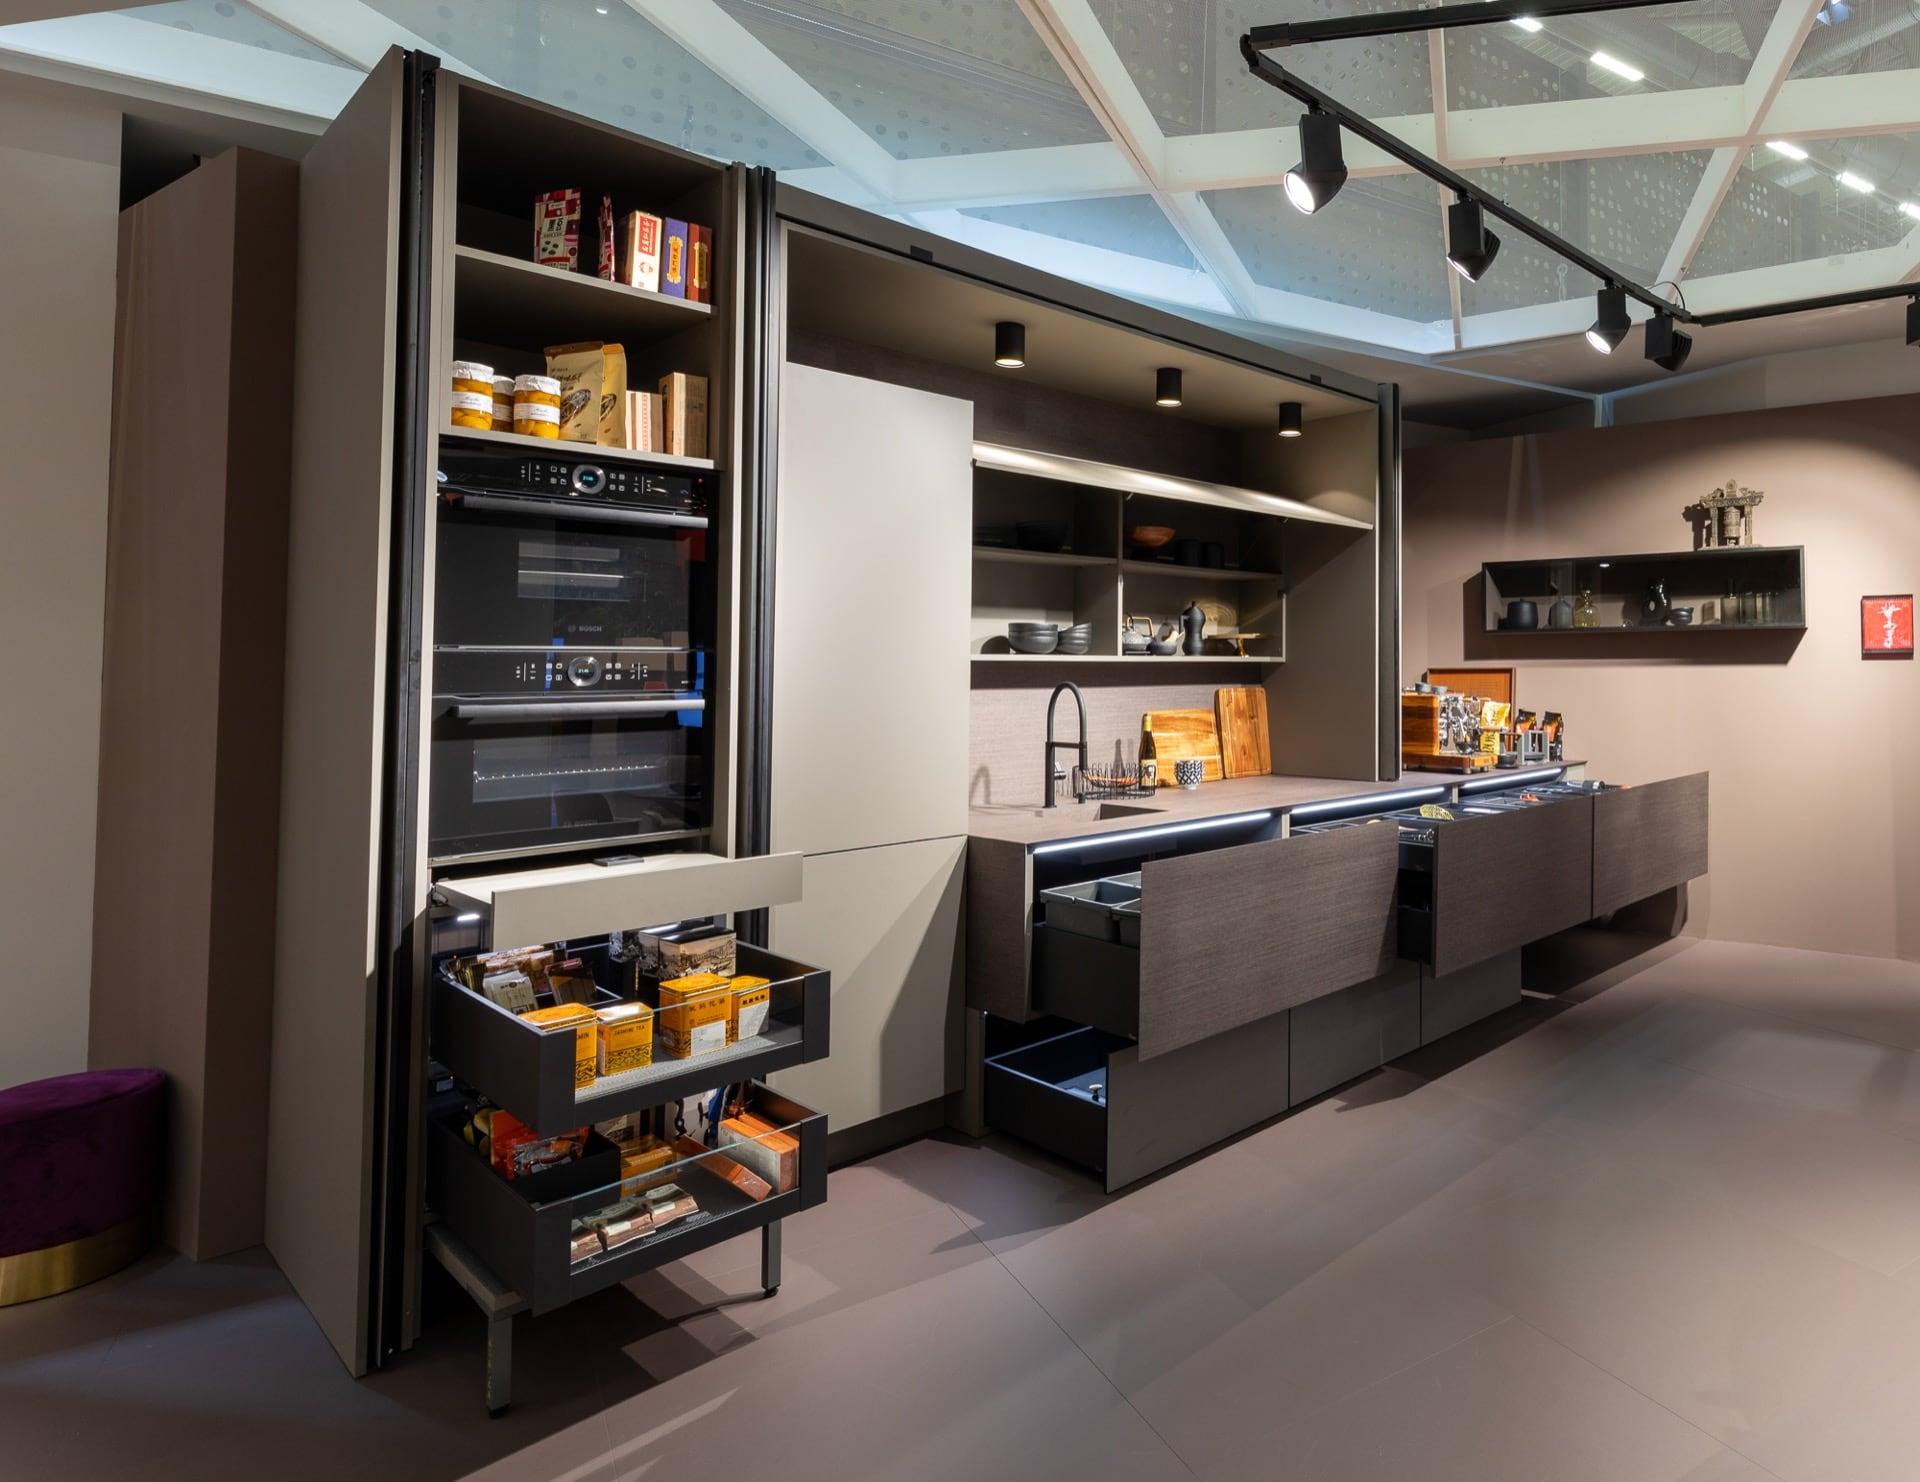 High-quality kitchen implemented with REVEGO uno and two REVEGO duo units.